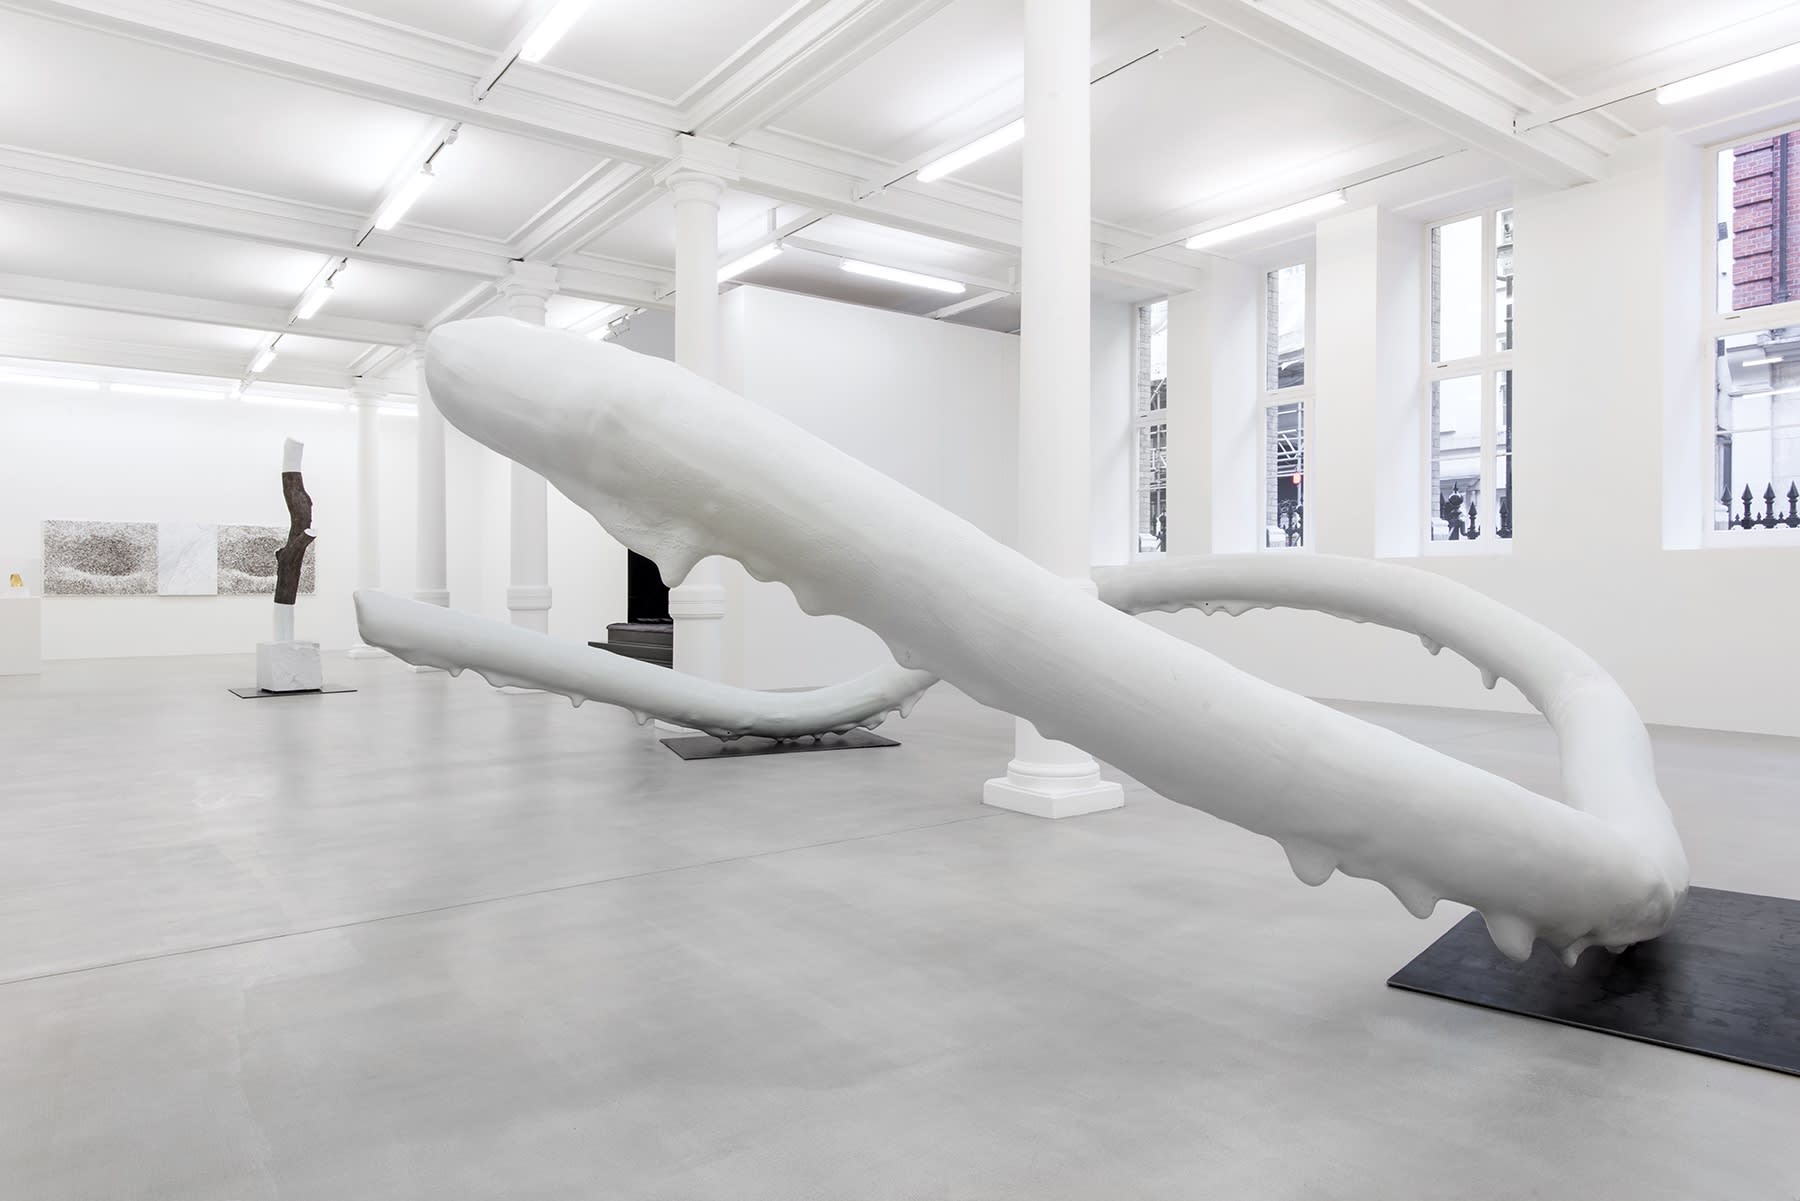 An abstract sculpture that appears to be dripping with white paint sits among other artworks in a gallery.